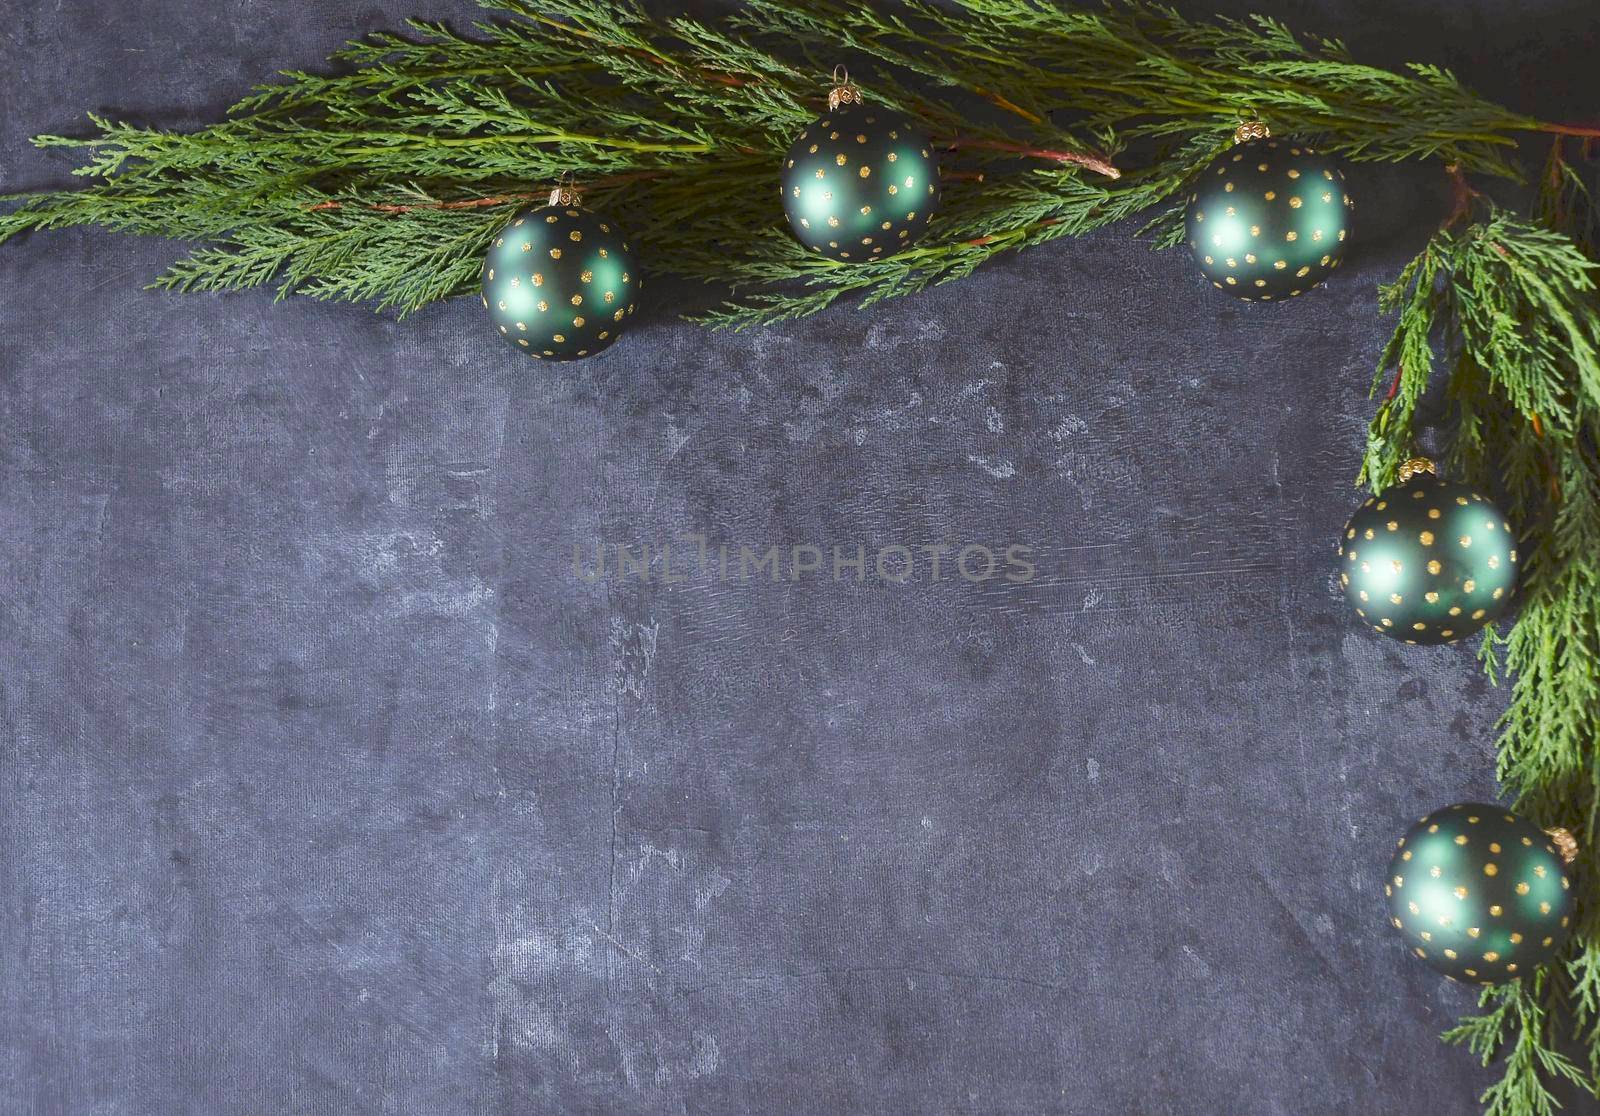 Christmas or new year table decor with fir branches, holly branches with berries by KaterinaDalemans